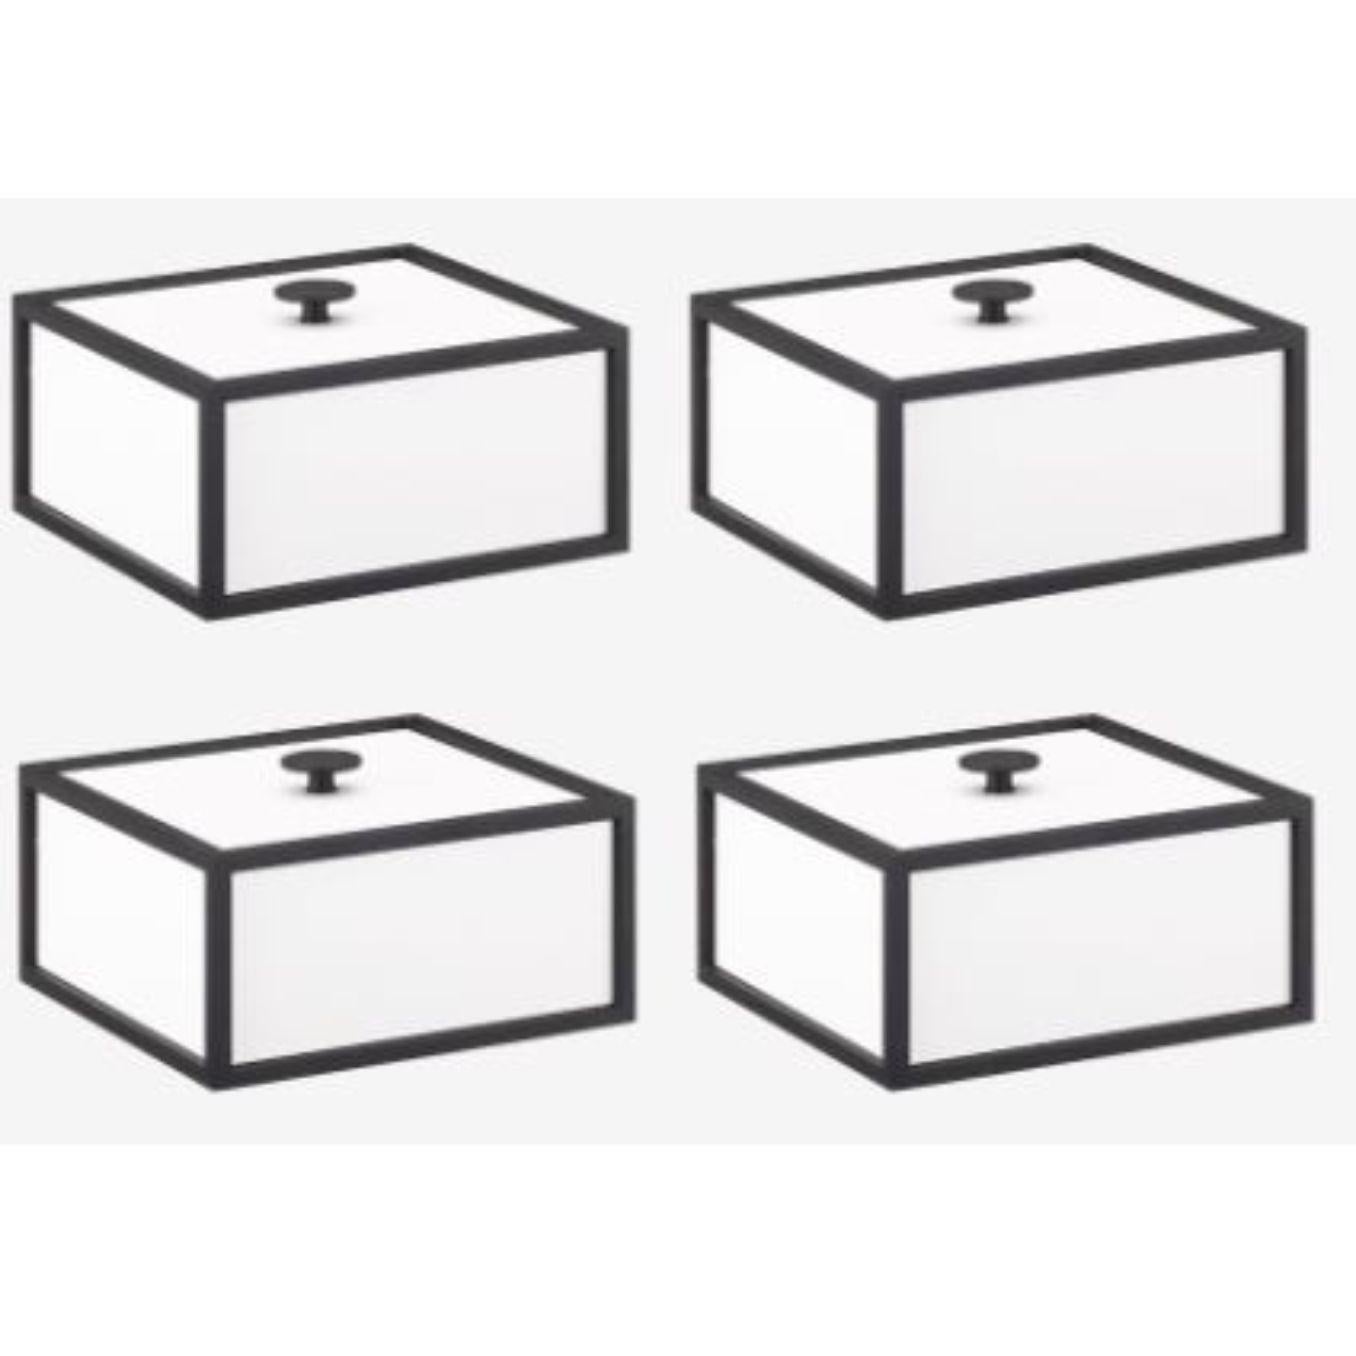 Set of 4 white frame 14 box by Lassen
Dimensions: d 10 x w 10 x h 7 cm 
Materials: Finér, Melamin, Melamine, Metal, Veneer
Weight: 1.10 Kg

Frame box is a square box in a cubistic shape. The simple boxes are inspired by the Kubus candleholder